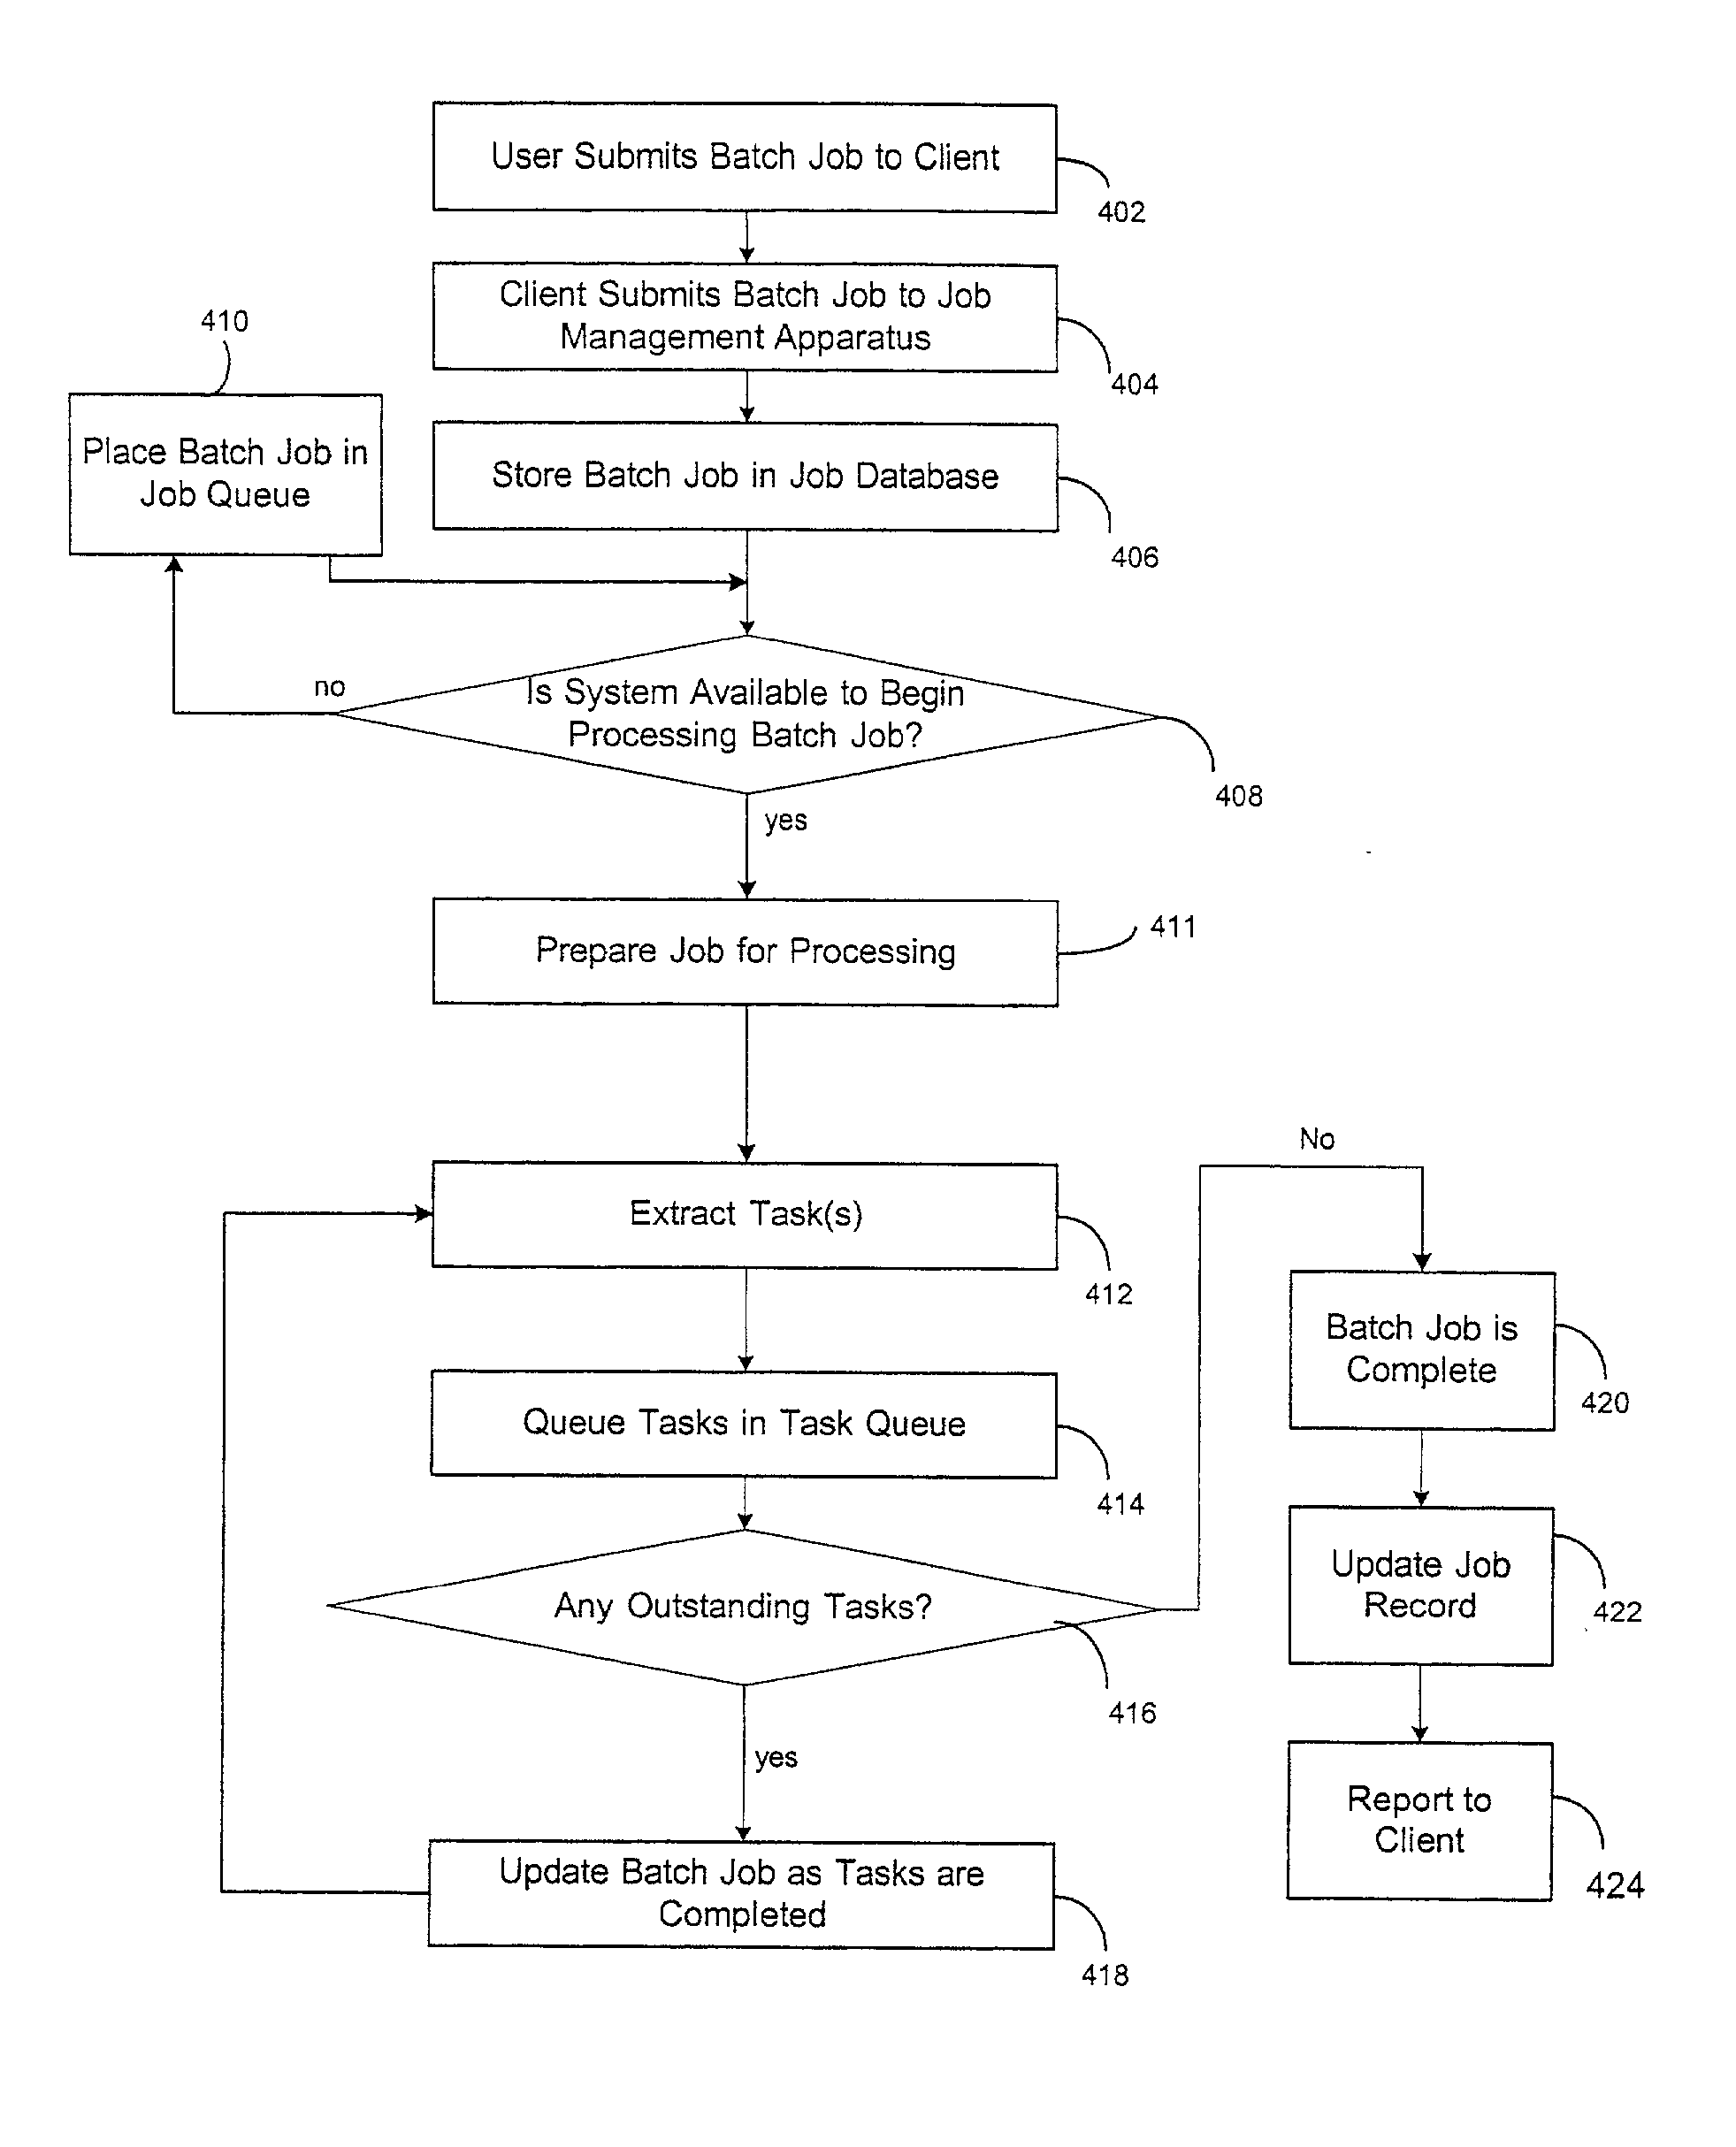 Method and system for executing batch jobs by delegating work to independent service providers